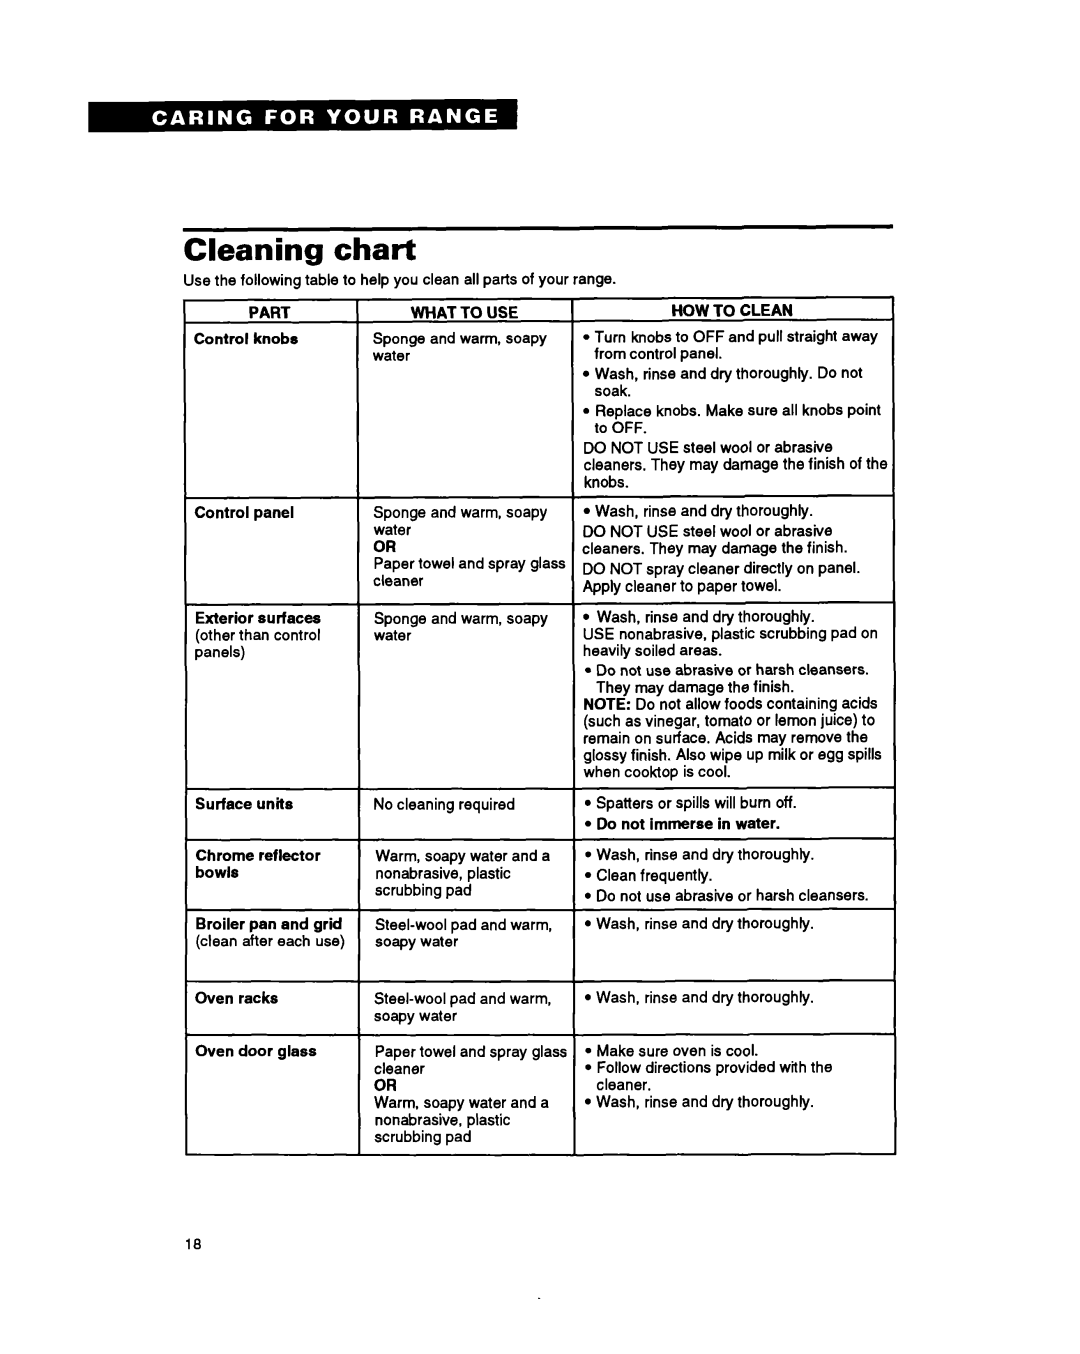 Whirlpool RS600BXY, Range, 336 important safety instructions Cleaning chart 